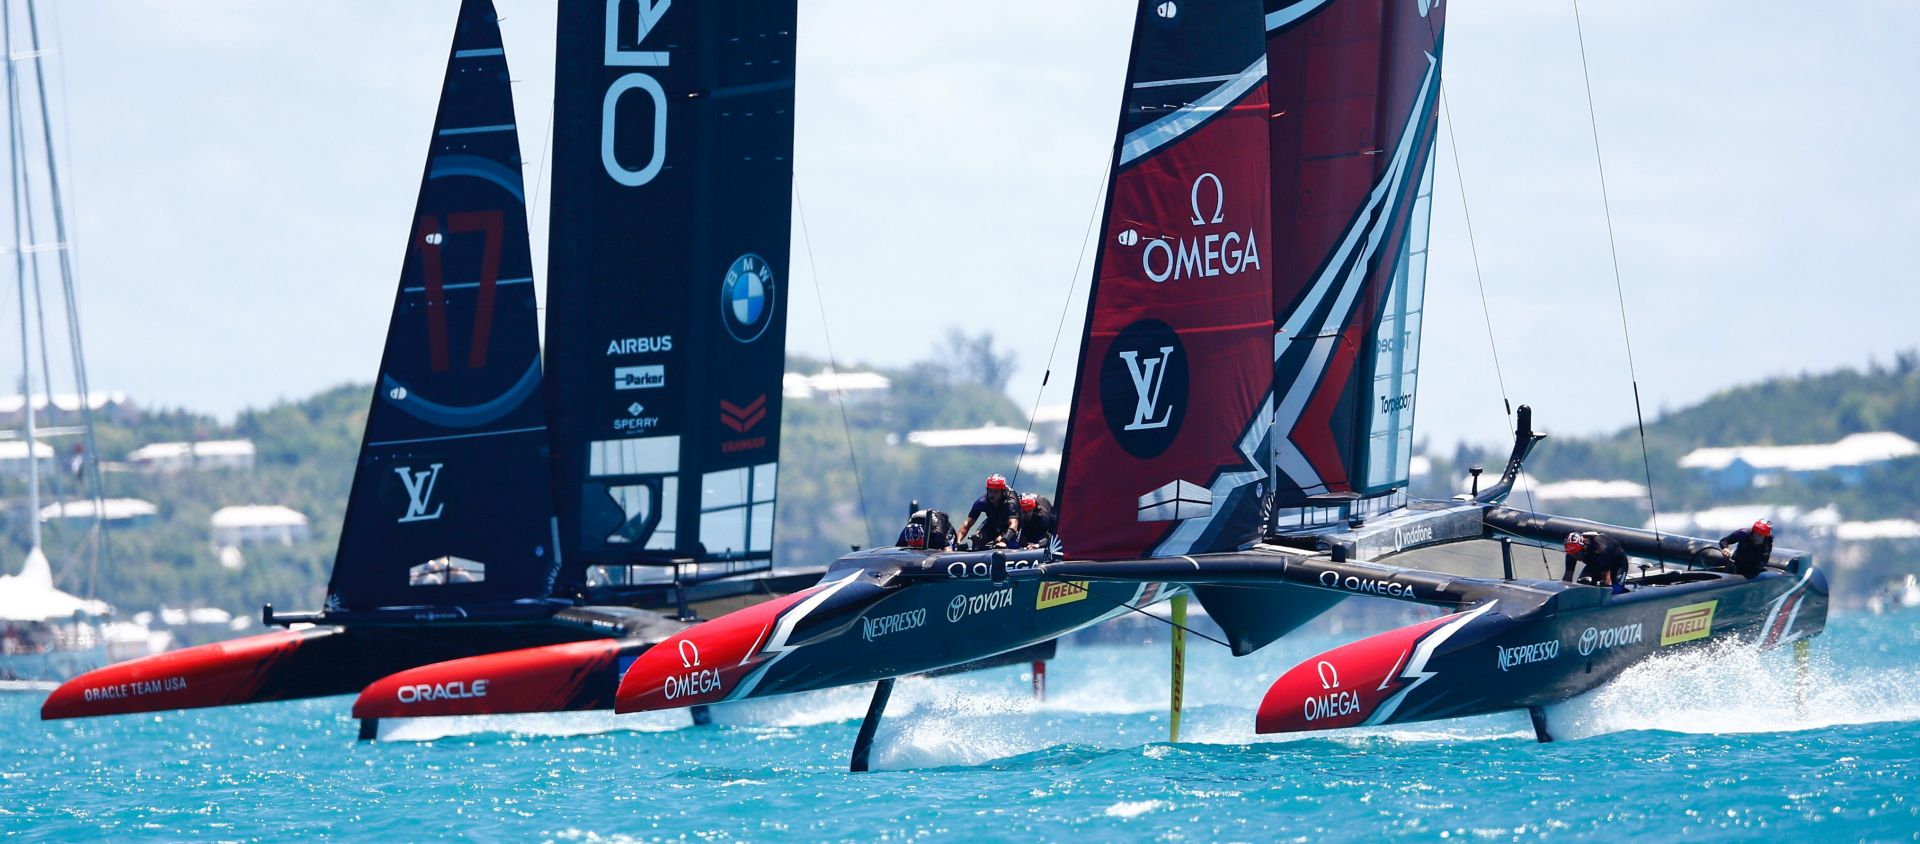 epa06050189 Oracle Team USA competes against Emirates Team New Zealand (R) during the seventh race of the America's Cup in the Great Sound, Bermuda, 25 June 2017. Emirates Team New Zealand is challenging the defender, Oracle Team USA, to take home the 35th America's Cup.  EPA/CJ GUNTHER